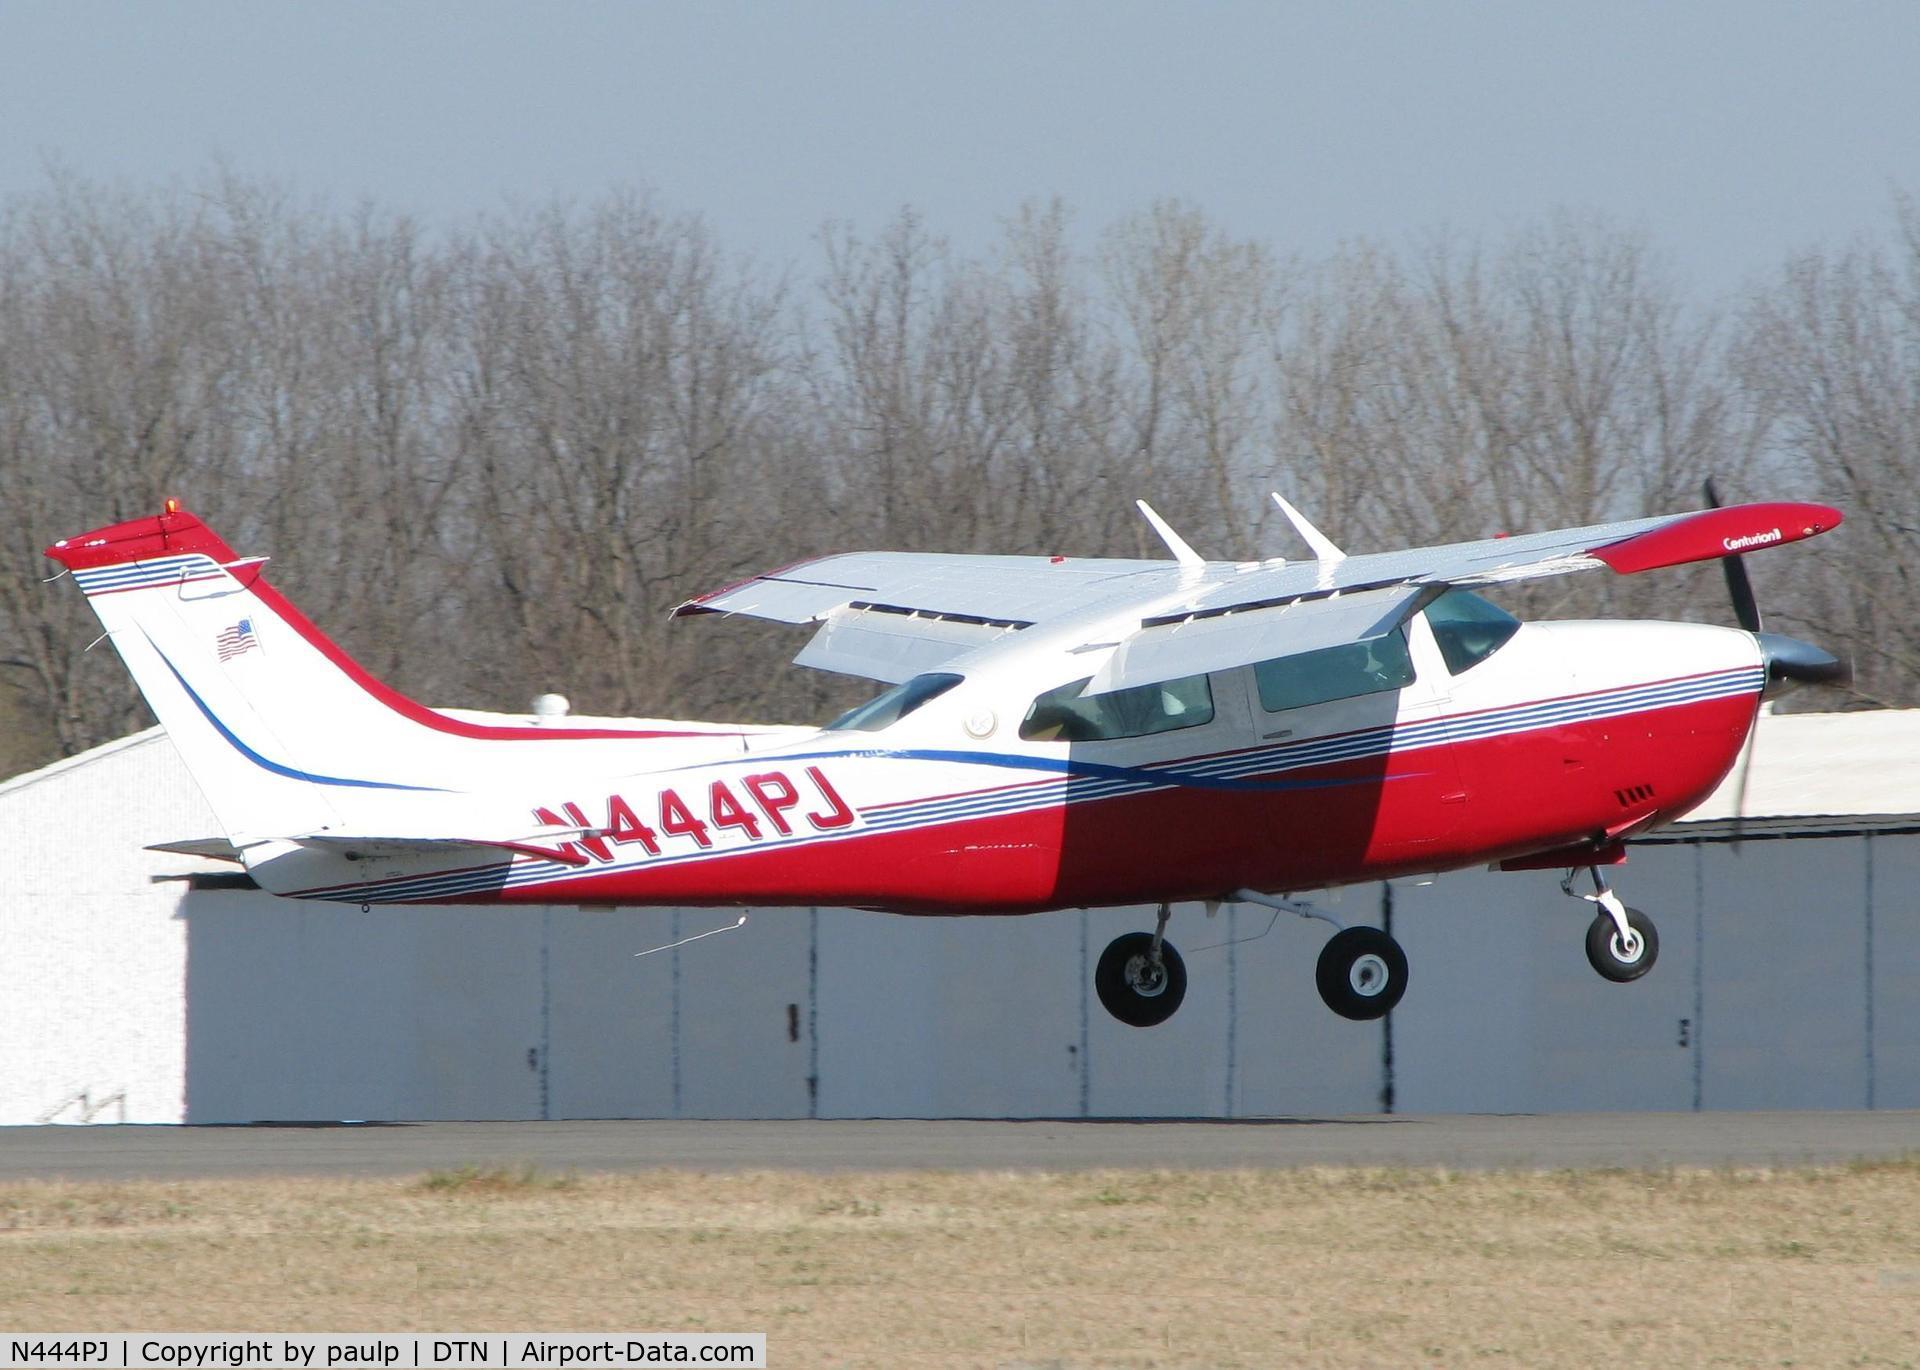 N444PJ, 1974 Cessna 210L Centurion C/N 21060433, About to touch down on 14 at Downtown Shreveport.